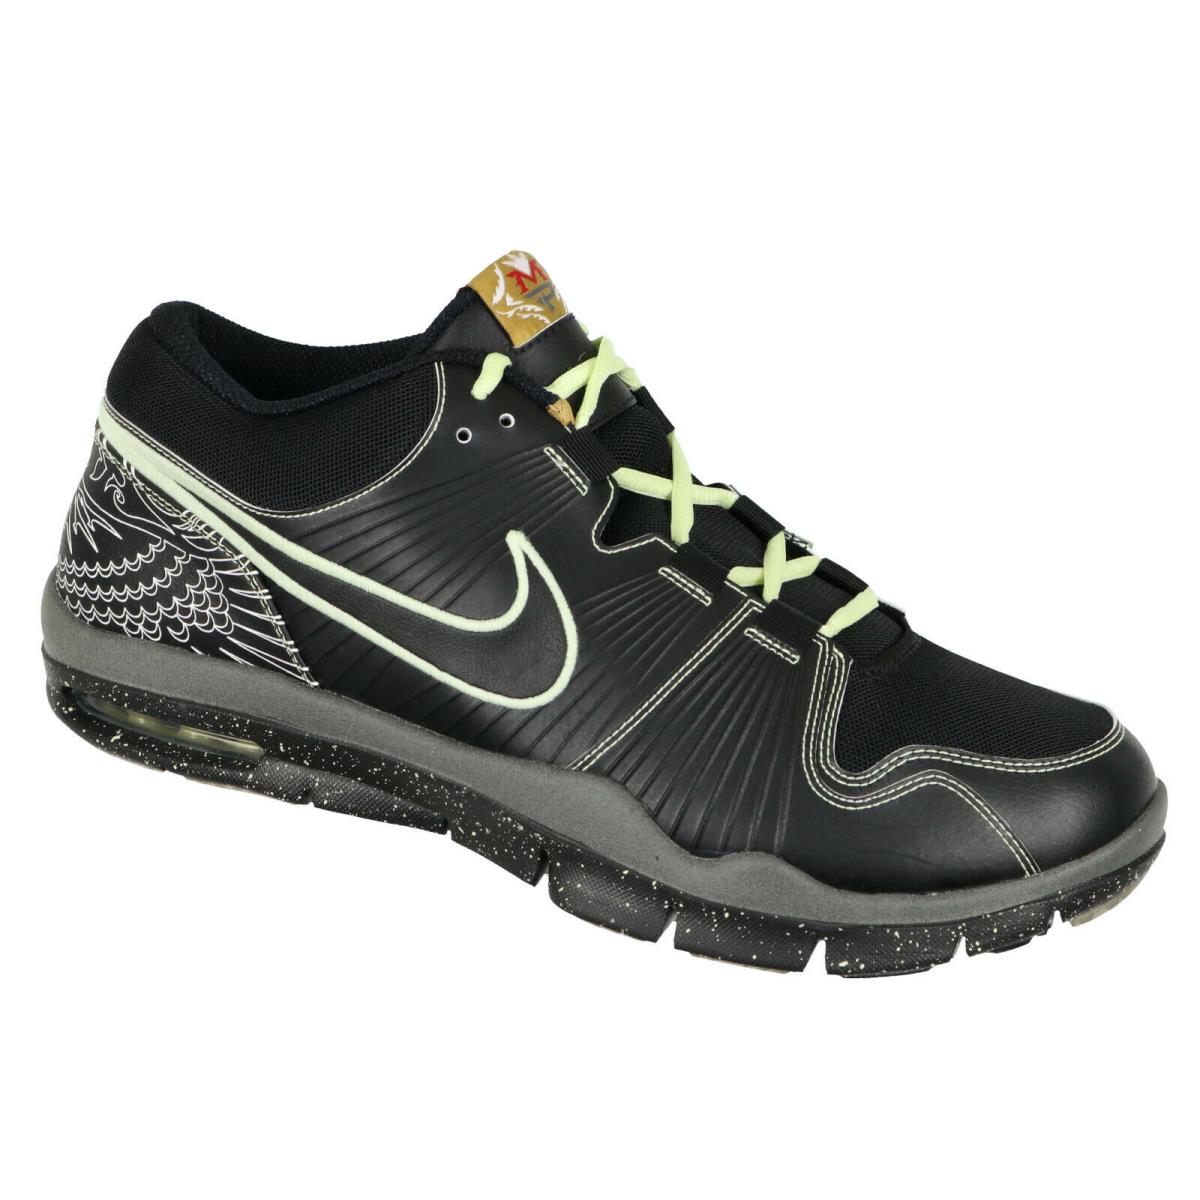 Nike Trainer 1 PE Cross Training Shoes sz 13 Lights Out Edition Manny Pacquiao - Black, Manufacturer: Black, Main: Black